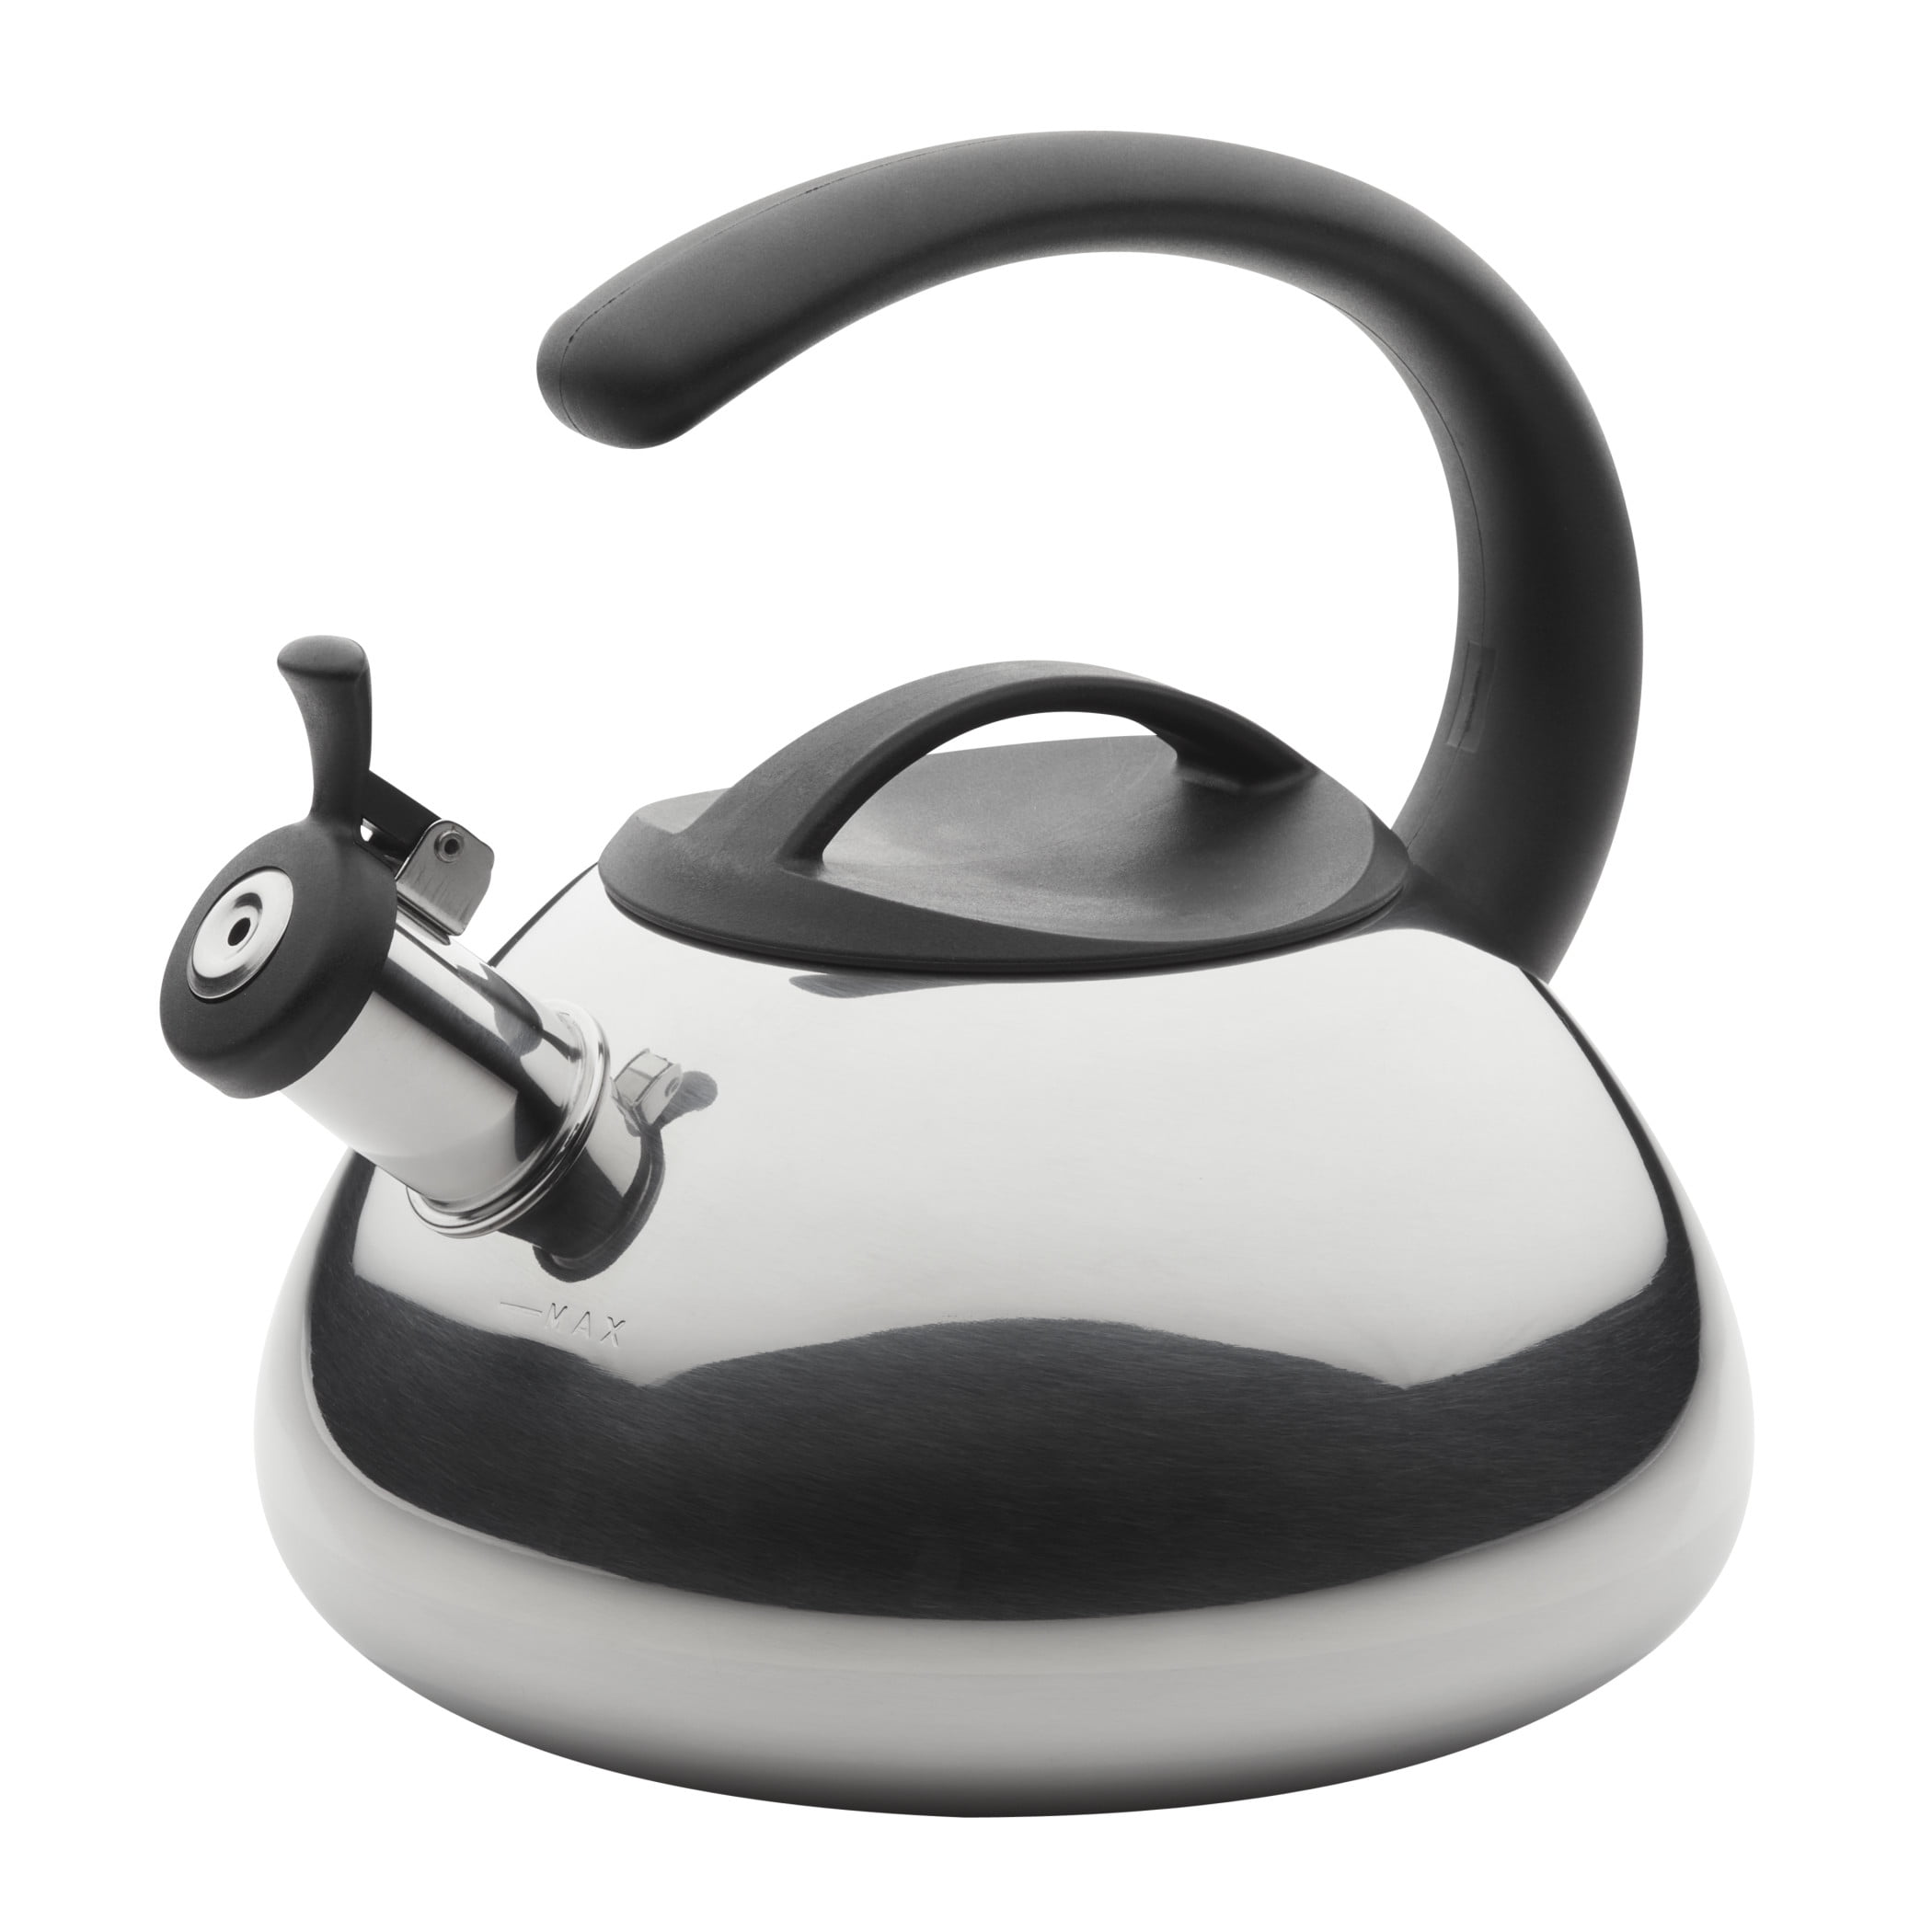 NEW Primula Catalina Stainless Steel Whistling Tea Kettle 3-Quart FREE2DAYSHIP 